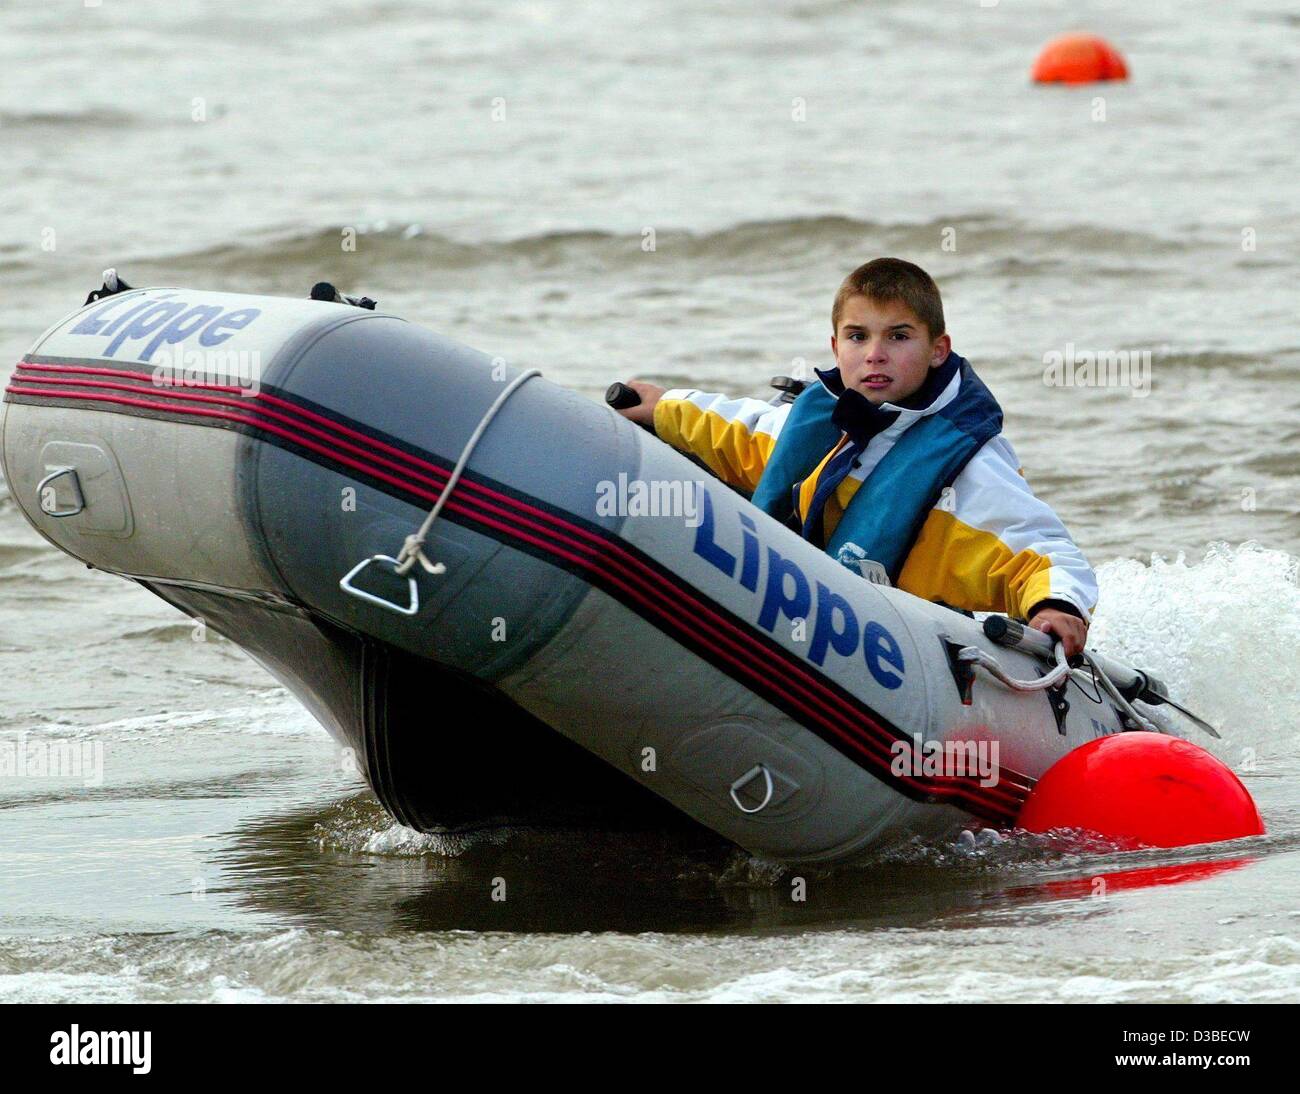 (dpa) - 10-year-old Tobias Komm from Dinslaken, Germany, practises manoeuvring his rafting boat in the docks of the River Rhine near Wesel in Germany, 13 January 2003. The surface-marker buoys are close to each other and require quick reflexes from the navigator. Tobias is world champion in his age  Stock Photo